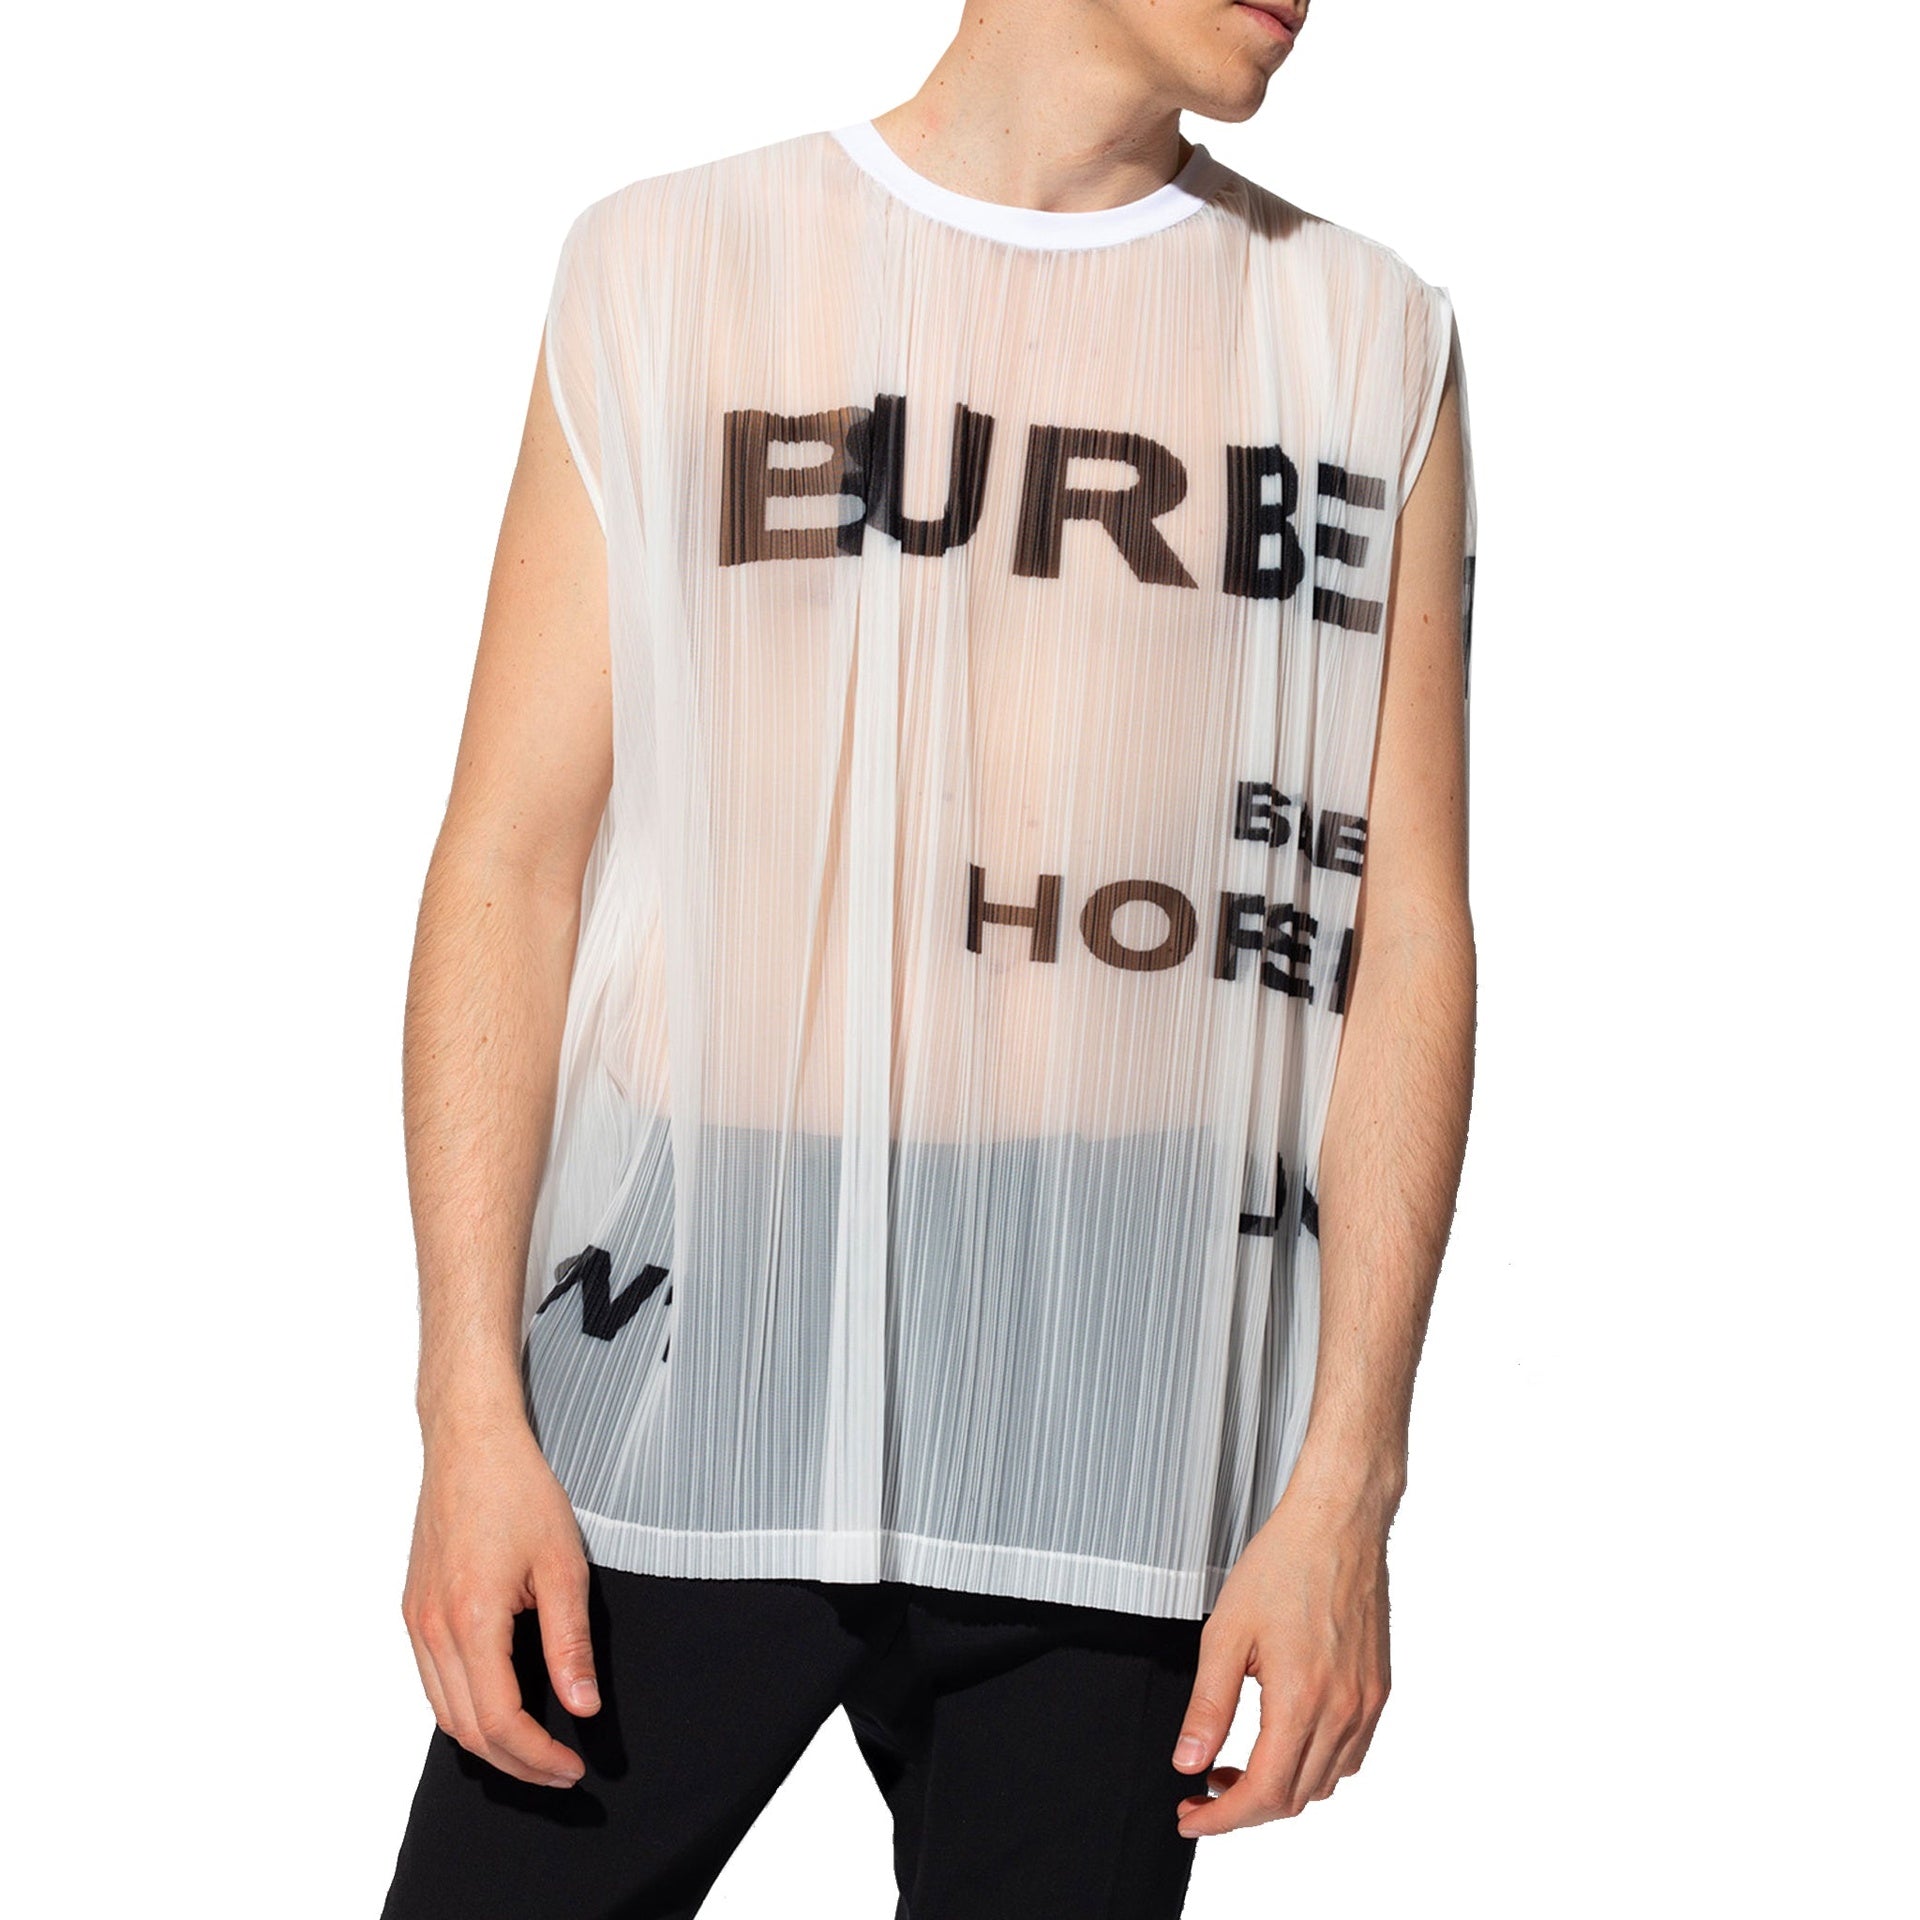 BURBERRY-OUTLET-SALE-Burberry-Horseferry-Print-Mesh-Tank-Top-Shirts-WHITE-S-ARCHIVE-COLLECTION-2.jpg